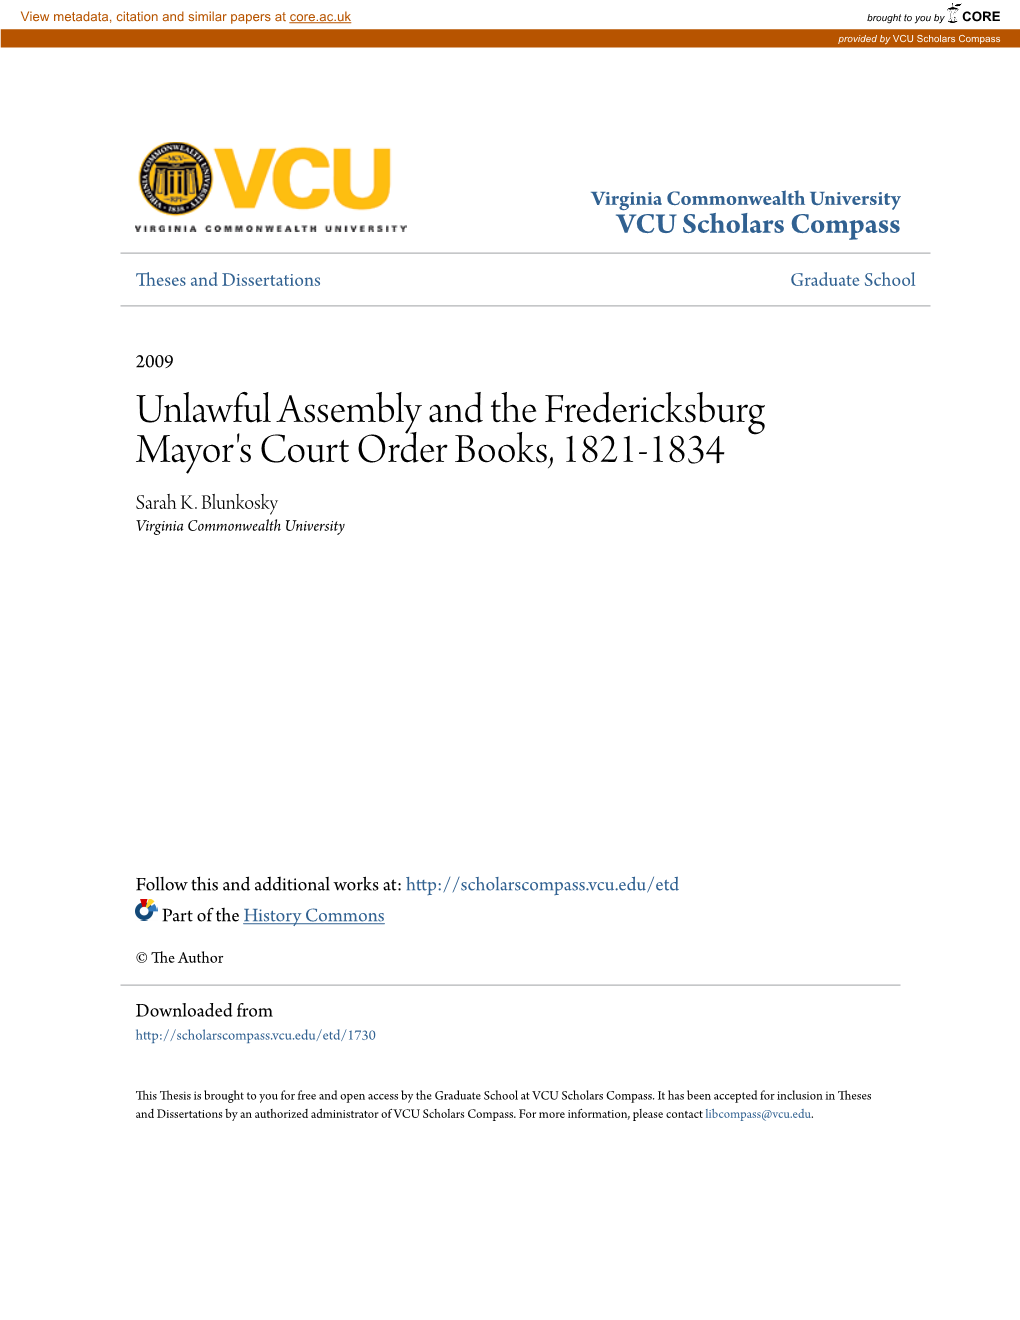 Unlawful Assembly and the Fredericksburg Mayor's Court Order Books, 1821-1834 Sarah K